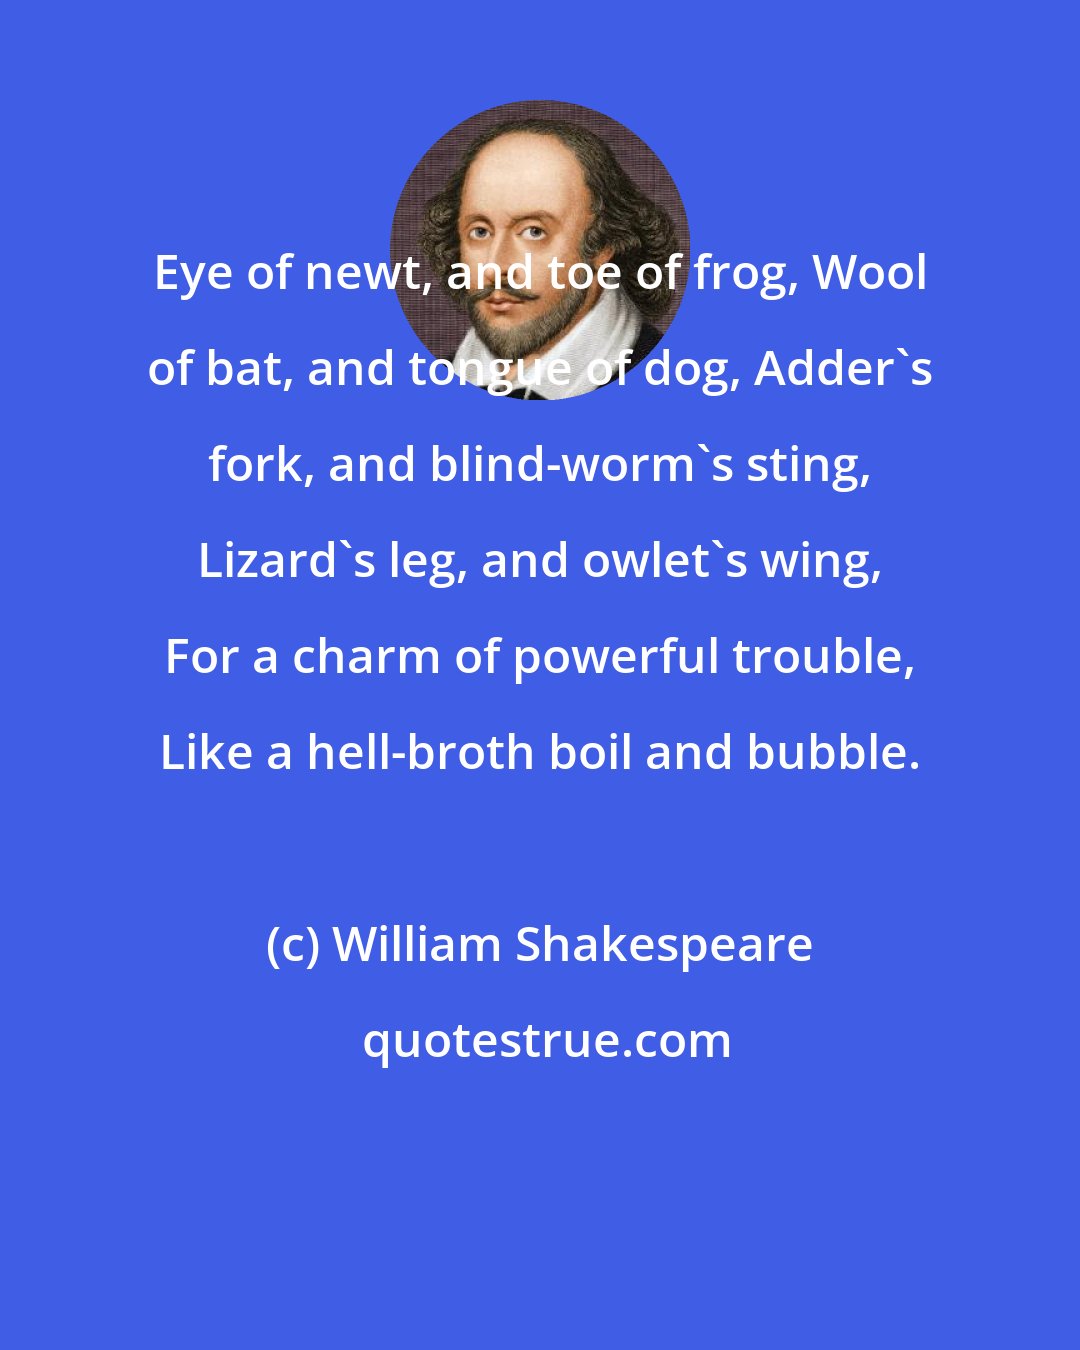 William Shakespeare: Eye of newt, and toe of frog, Wool of bat, and tongue of dog, Adder's fork, and blind-worm's sting, Lizard's leg, and owlet's wing, For a charm of powerful trouble, Like a hell-broth boil and bubble.